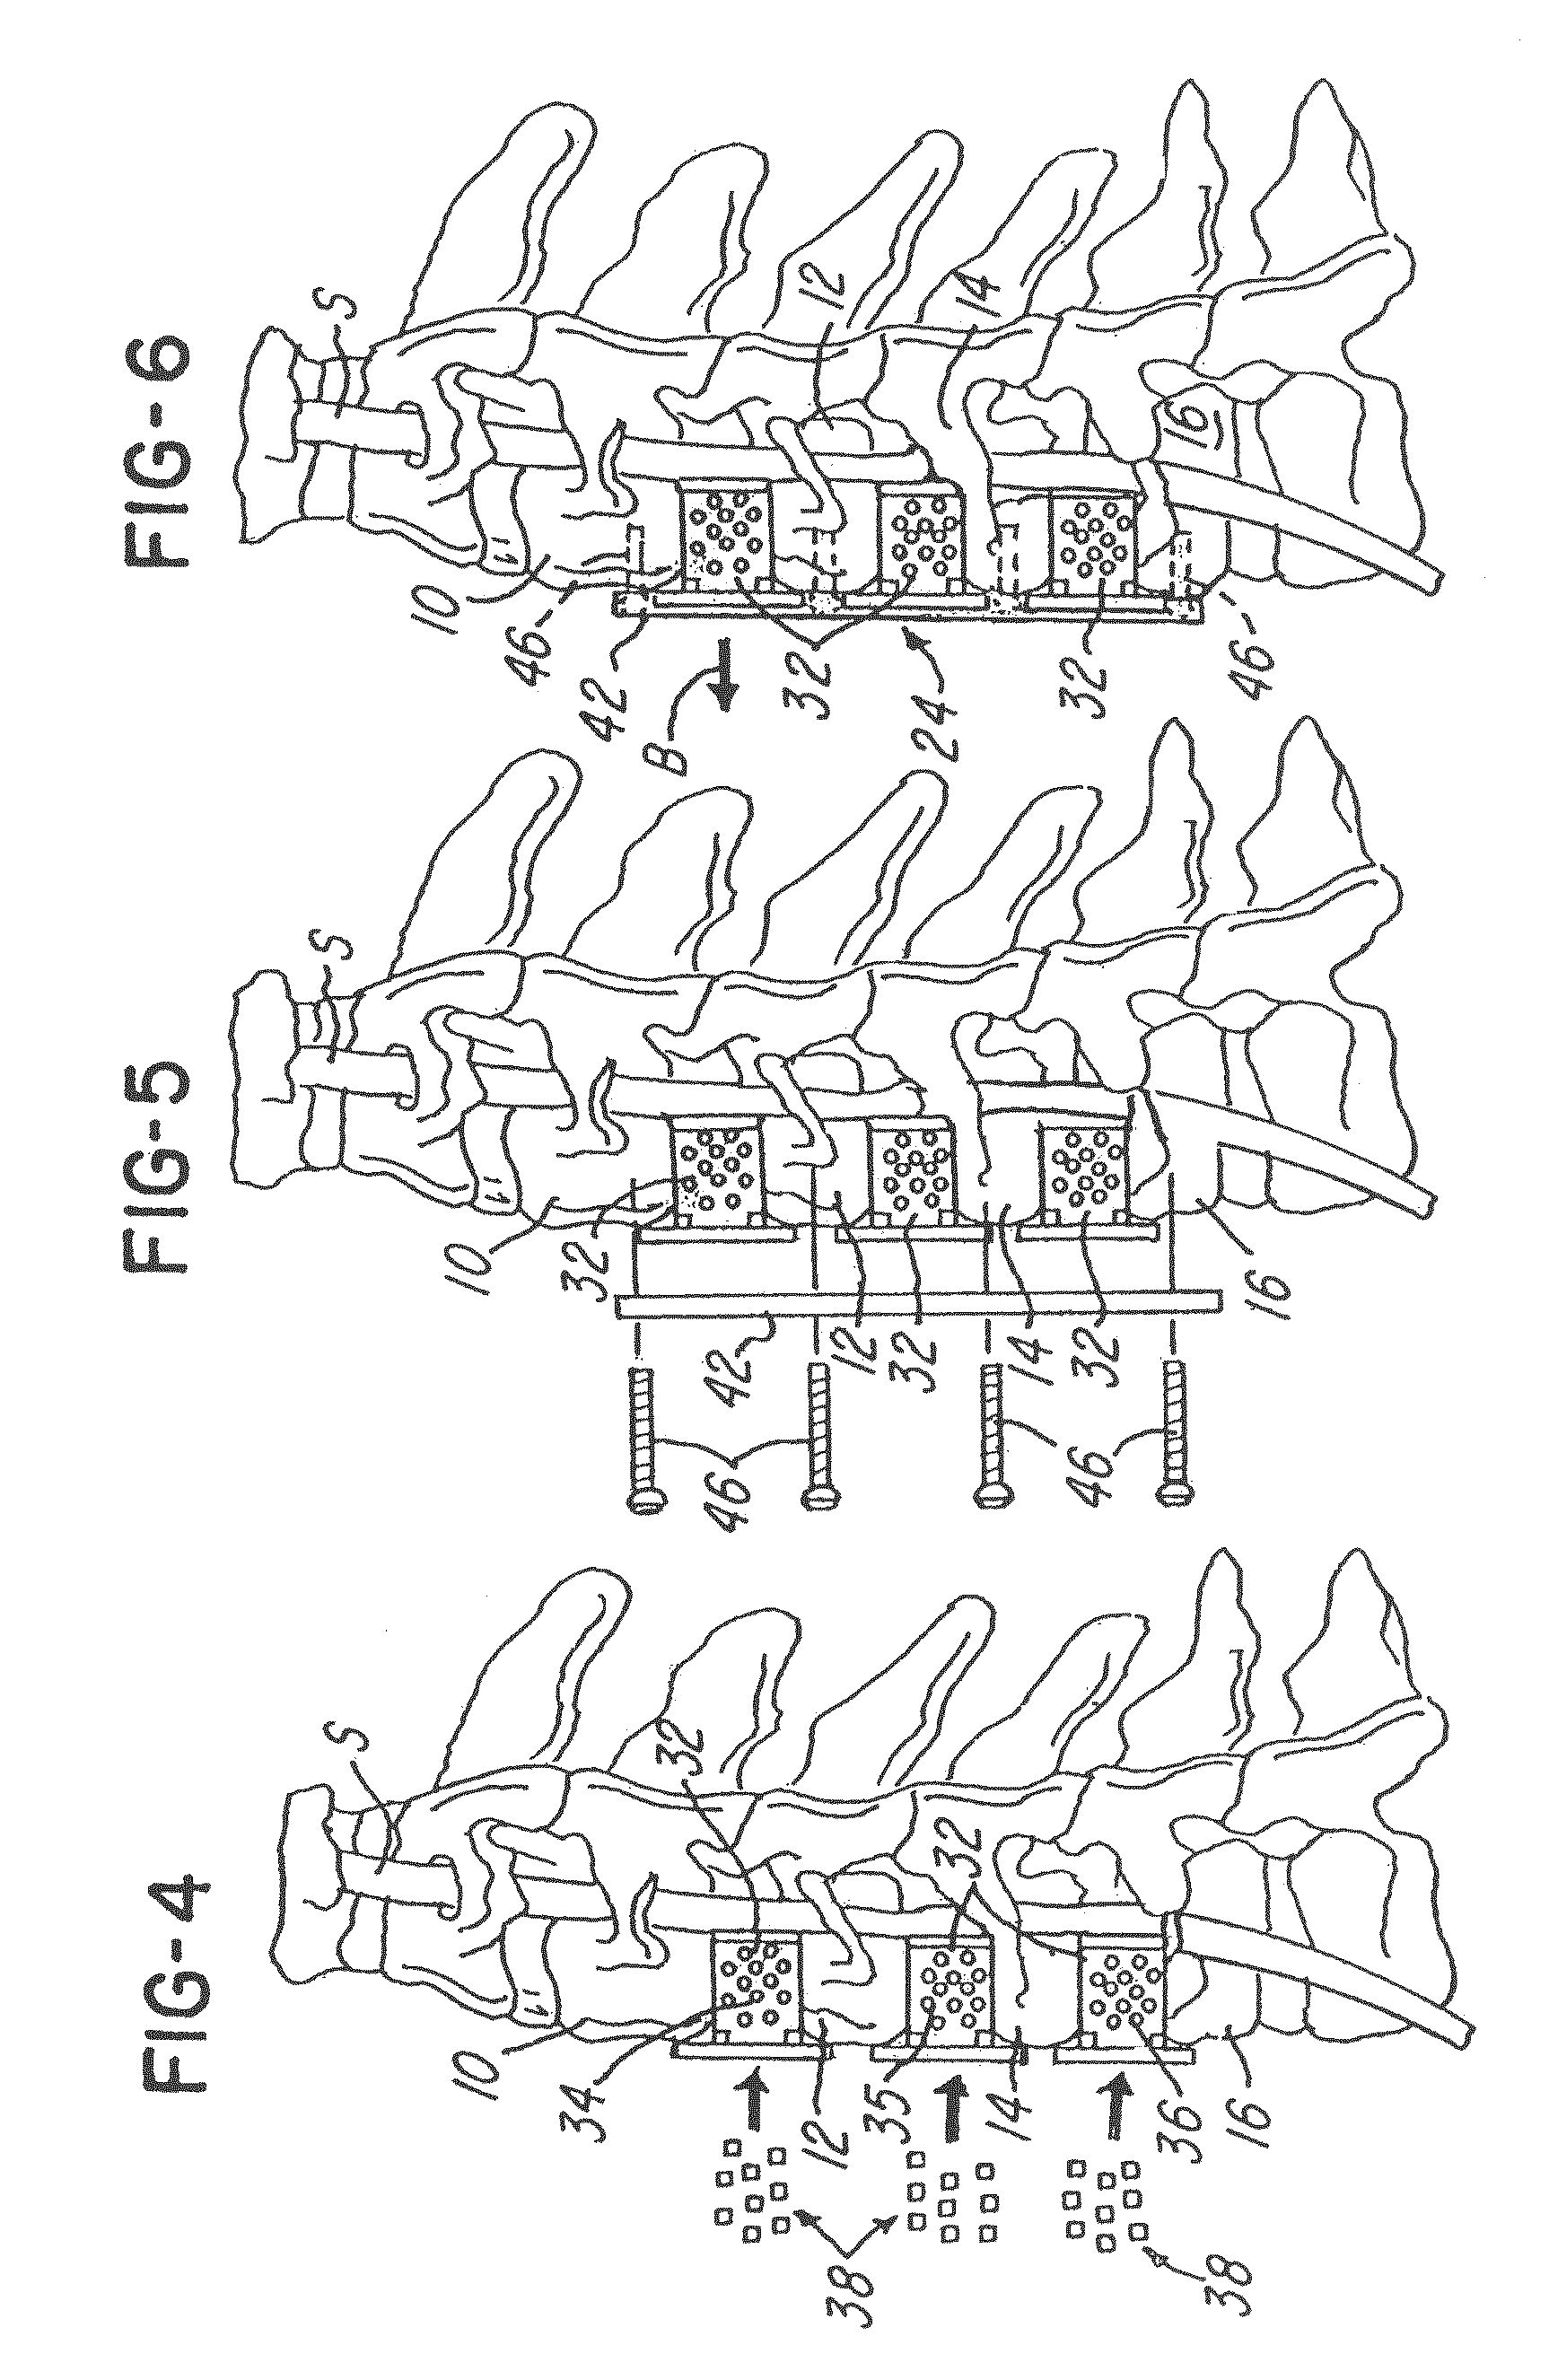 Spinal fusion system and method for fusing spinal bones